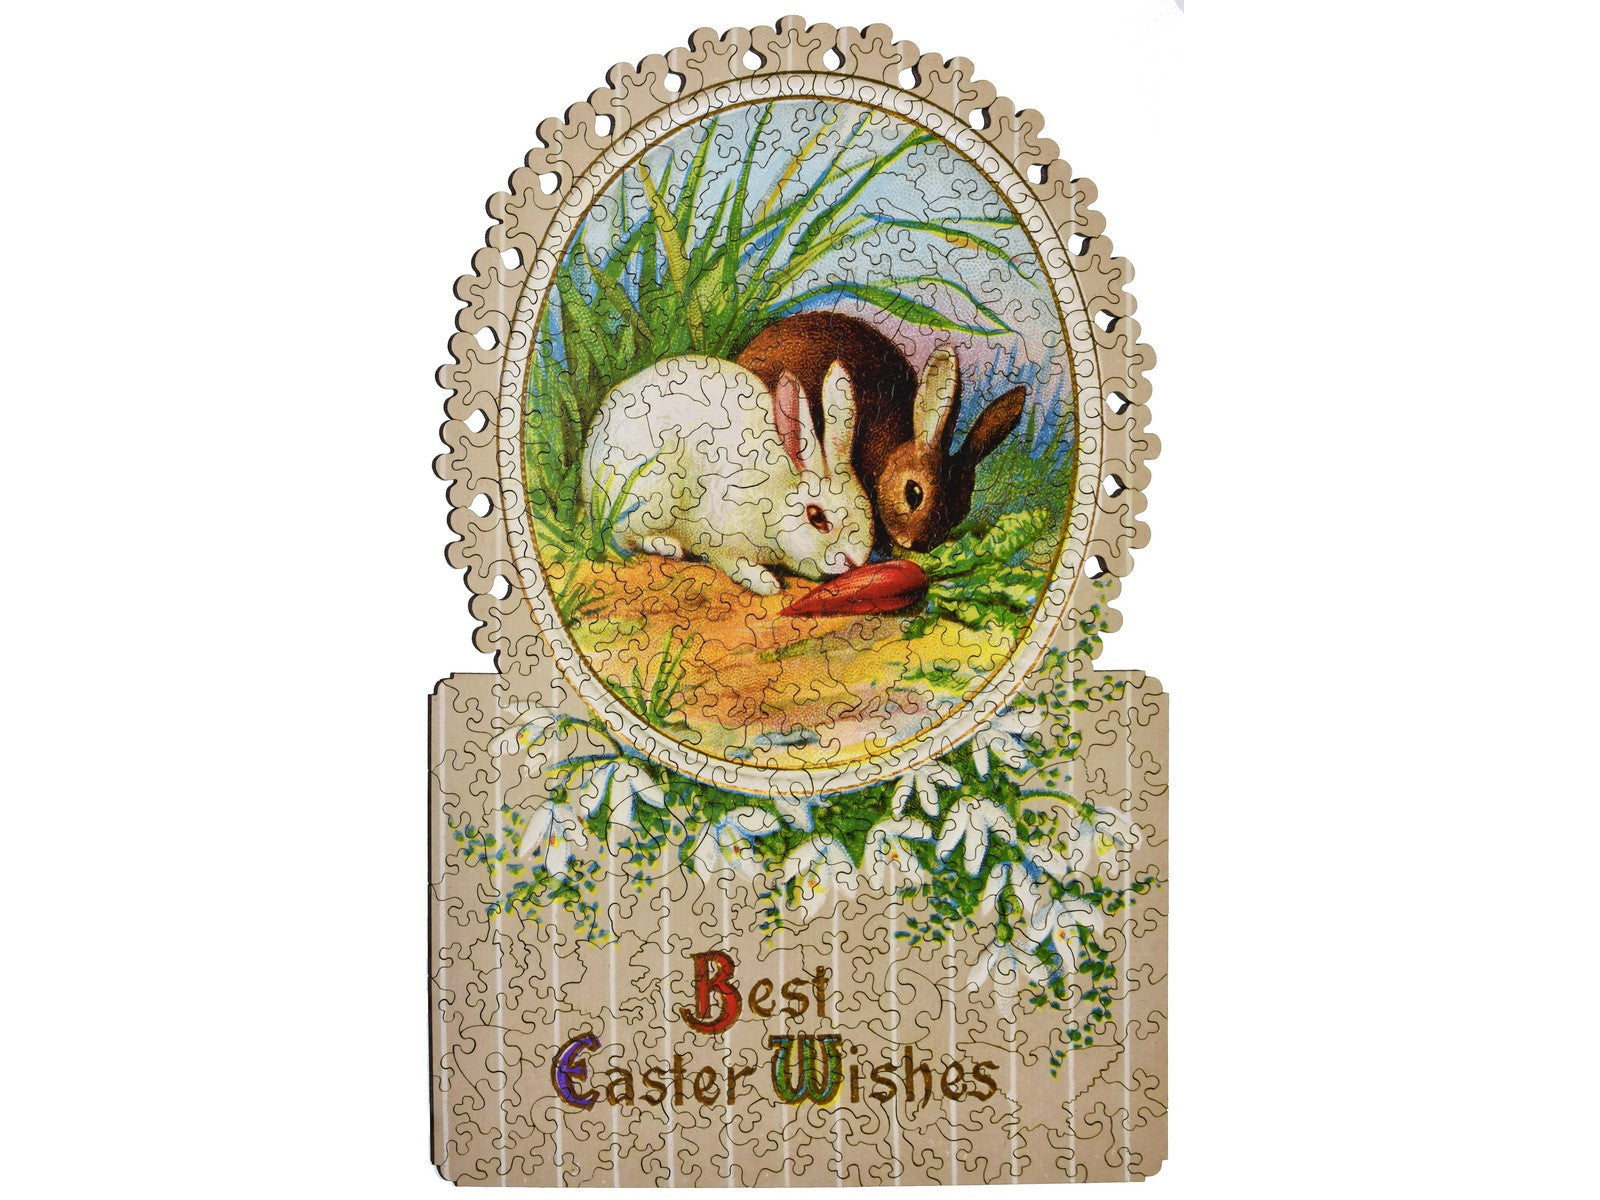 Best Easter Wishes